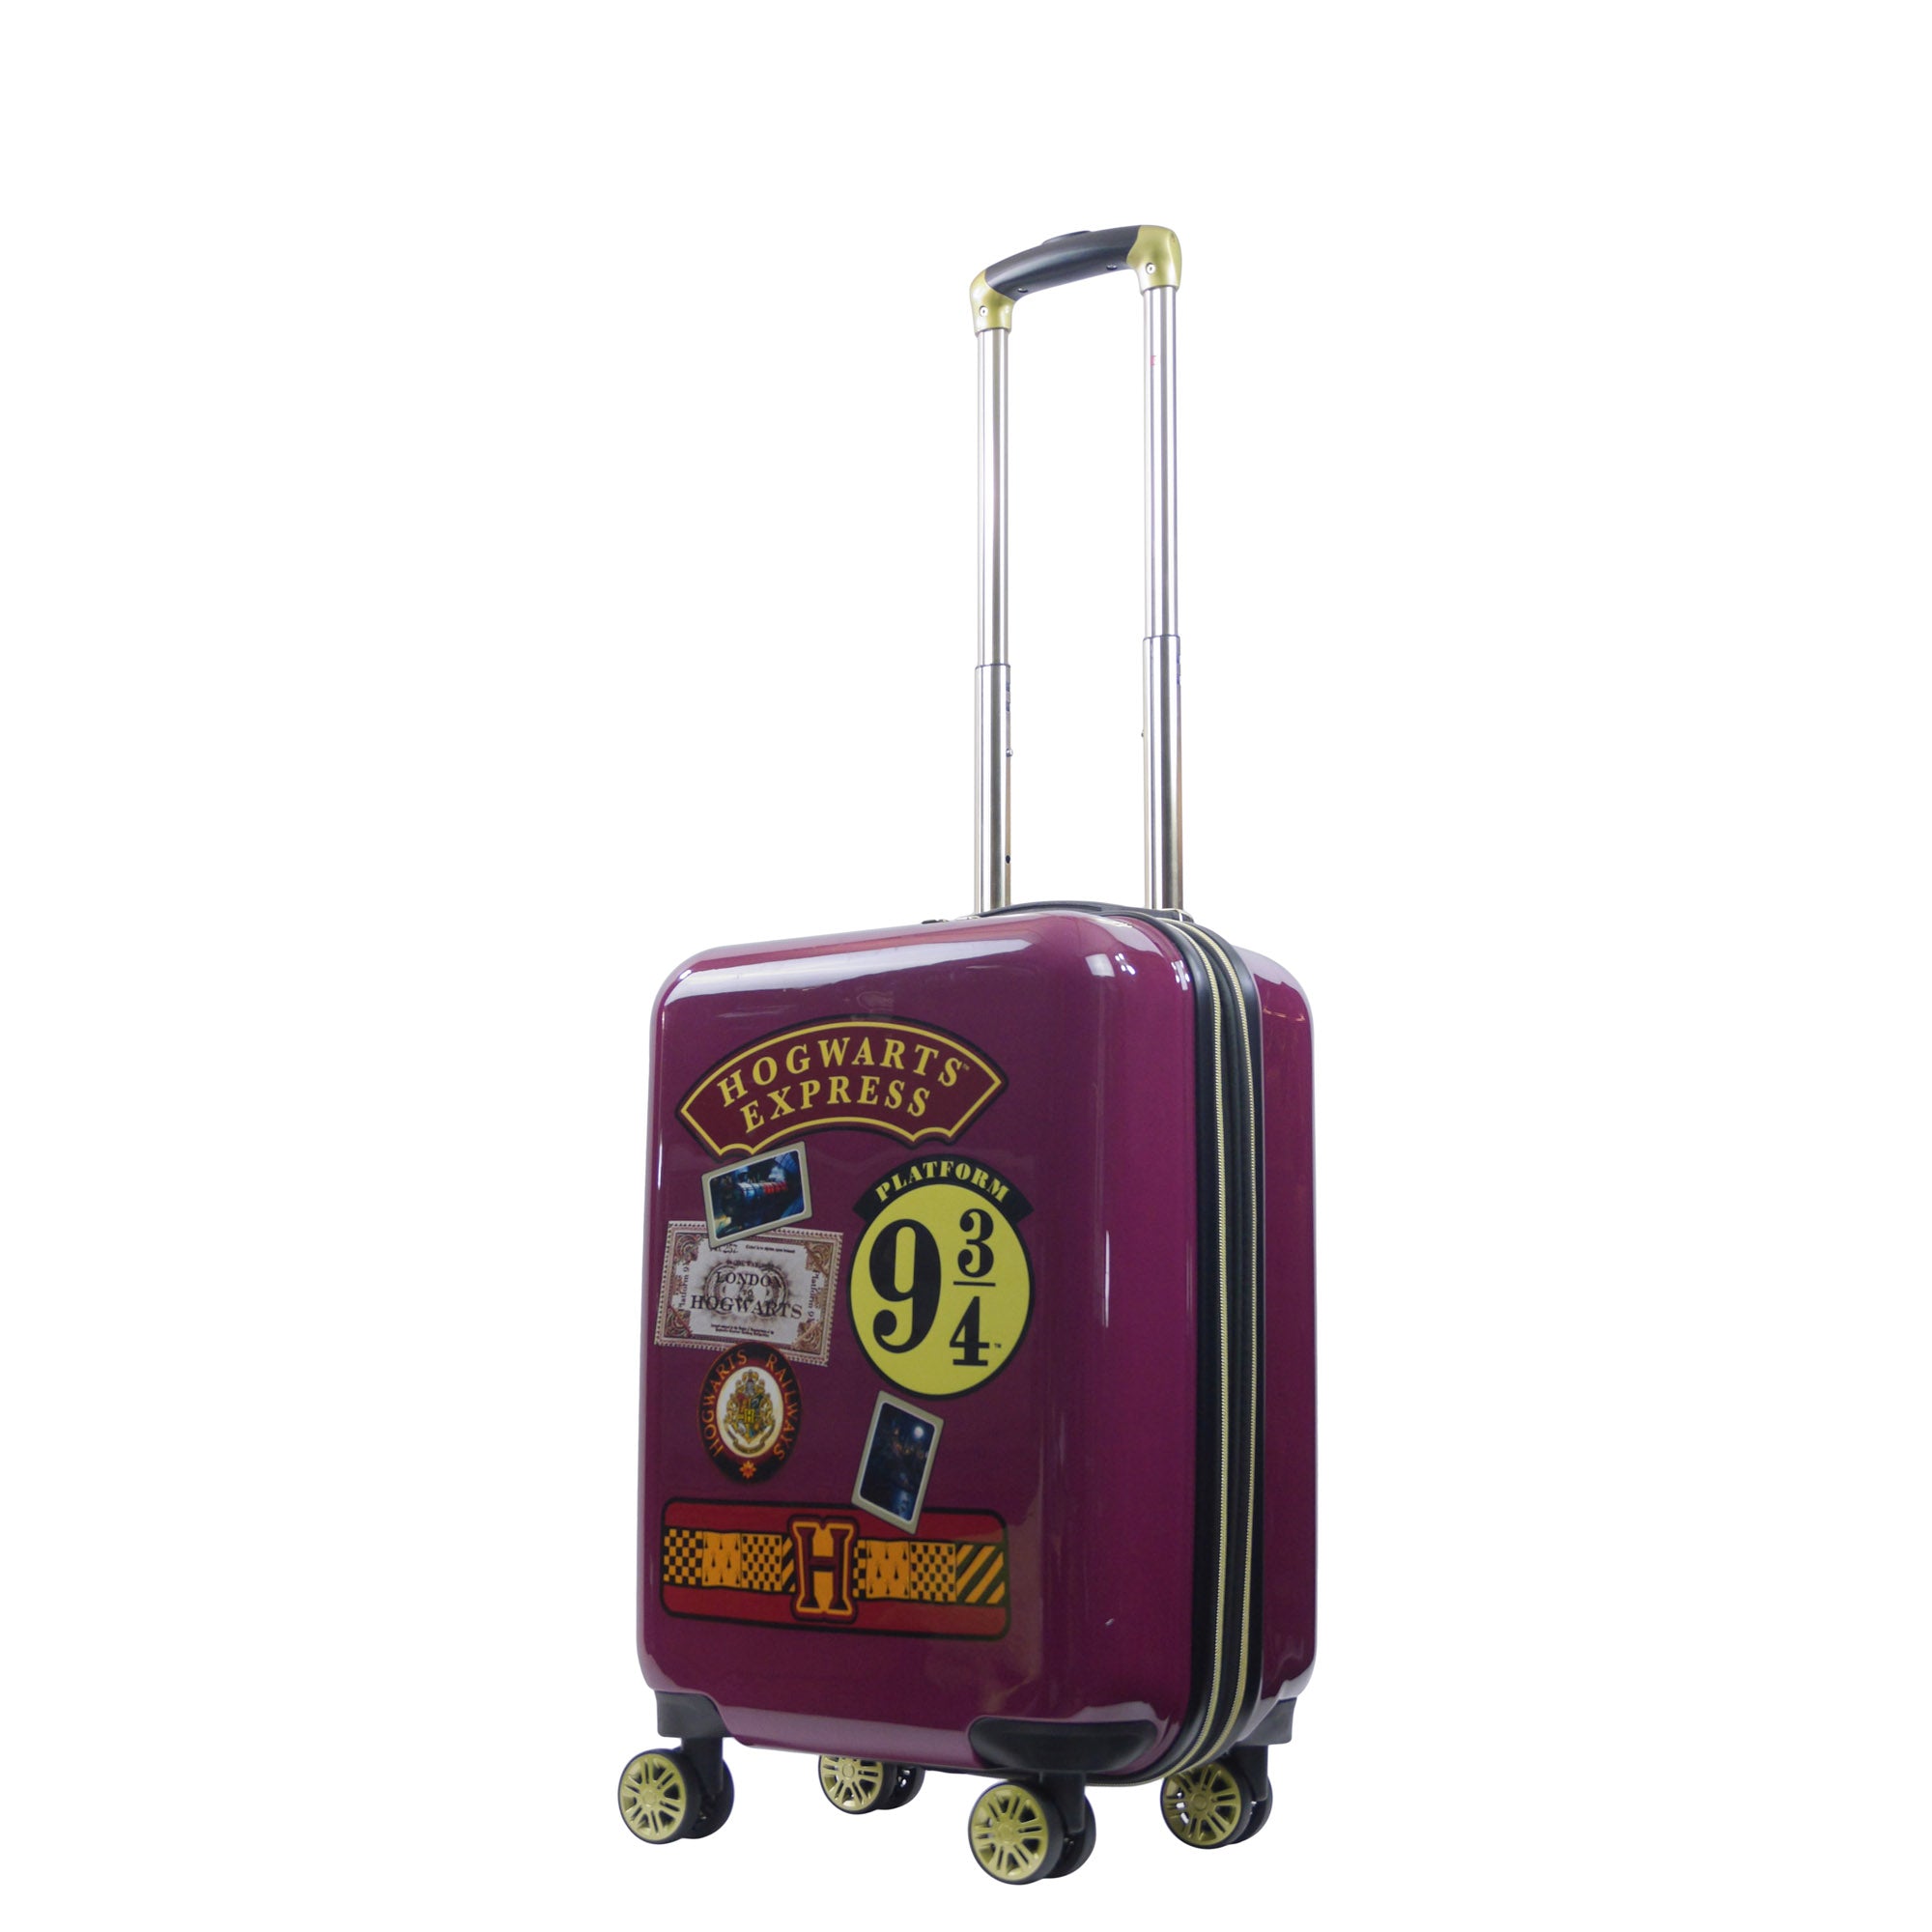 Harry Potter Hogwarts Express 21.5" carry-on suitcase Luggage Burgundy- best suitcases for traveling